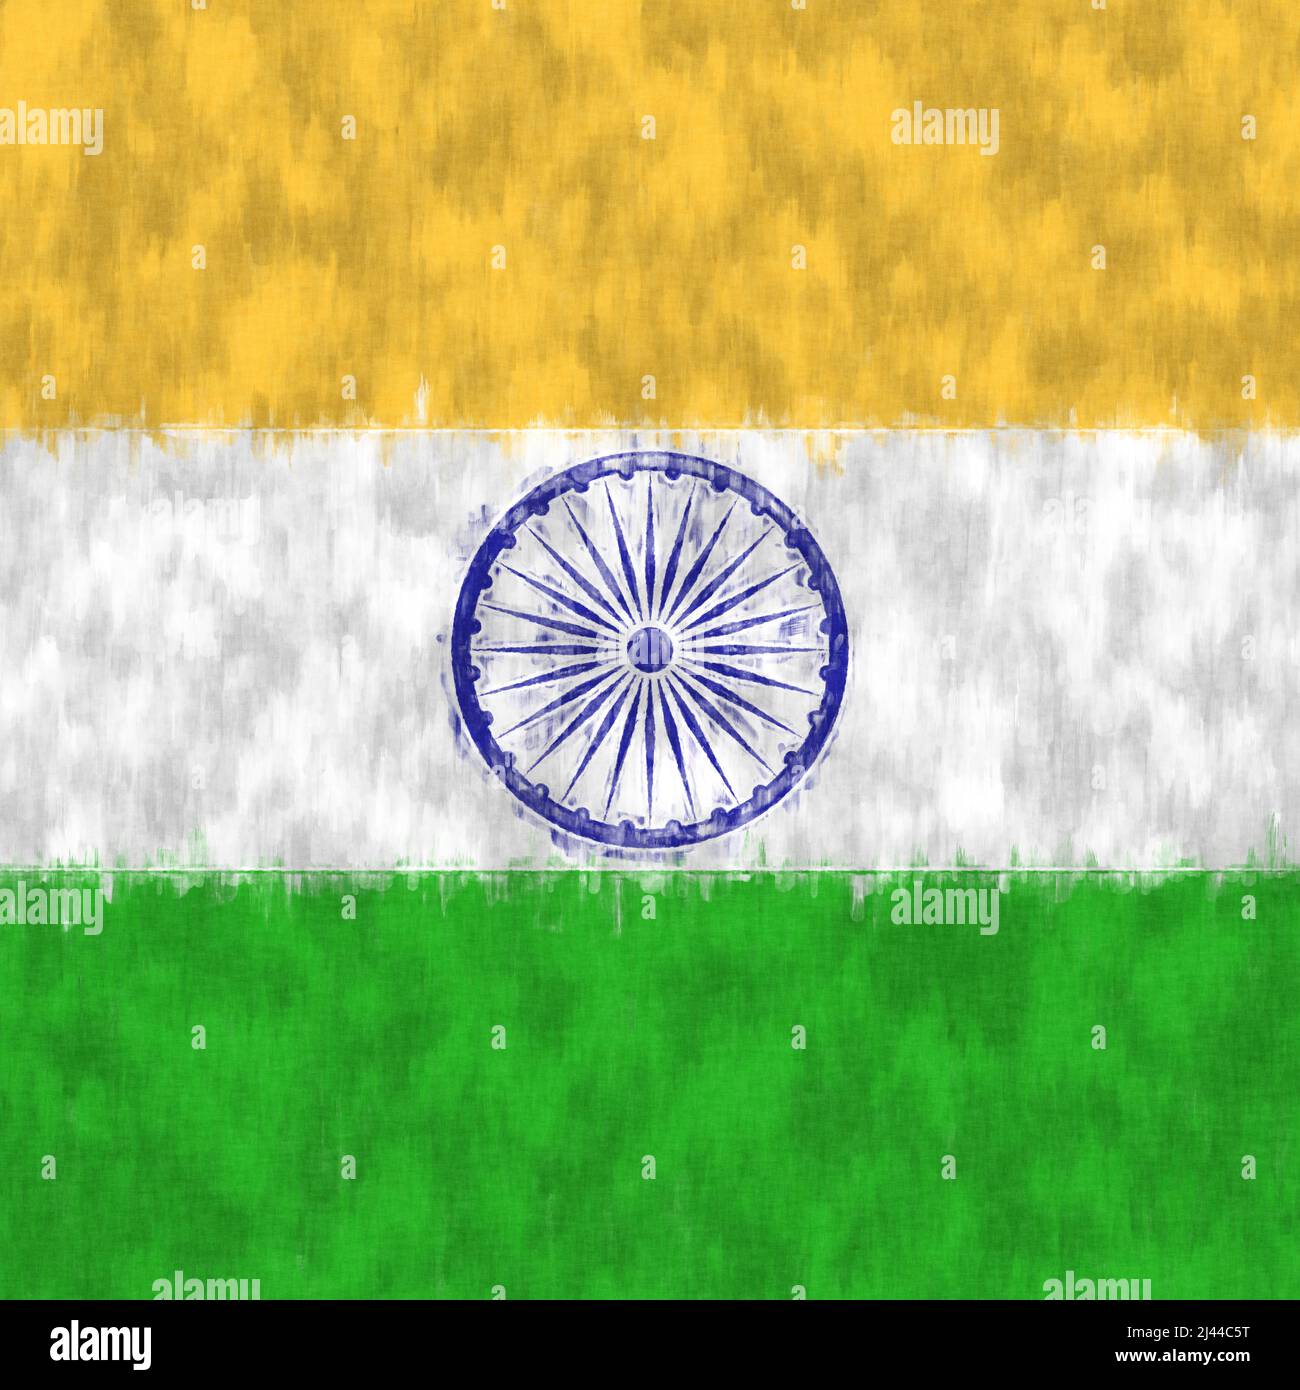 India oil painting. Indian emblem drawing canvas. A painted picture of a country's flag. Stock Photo